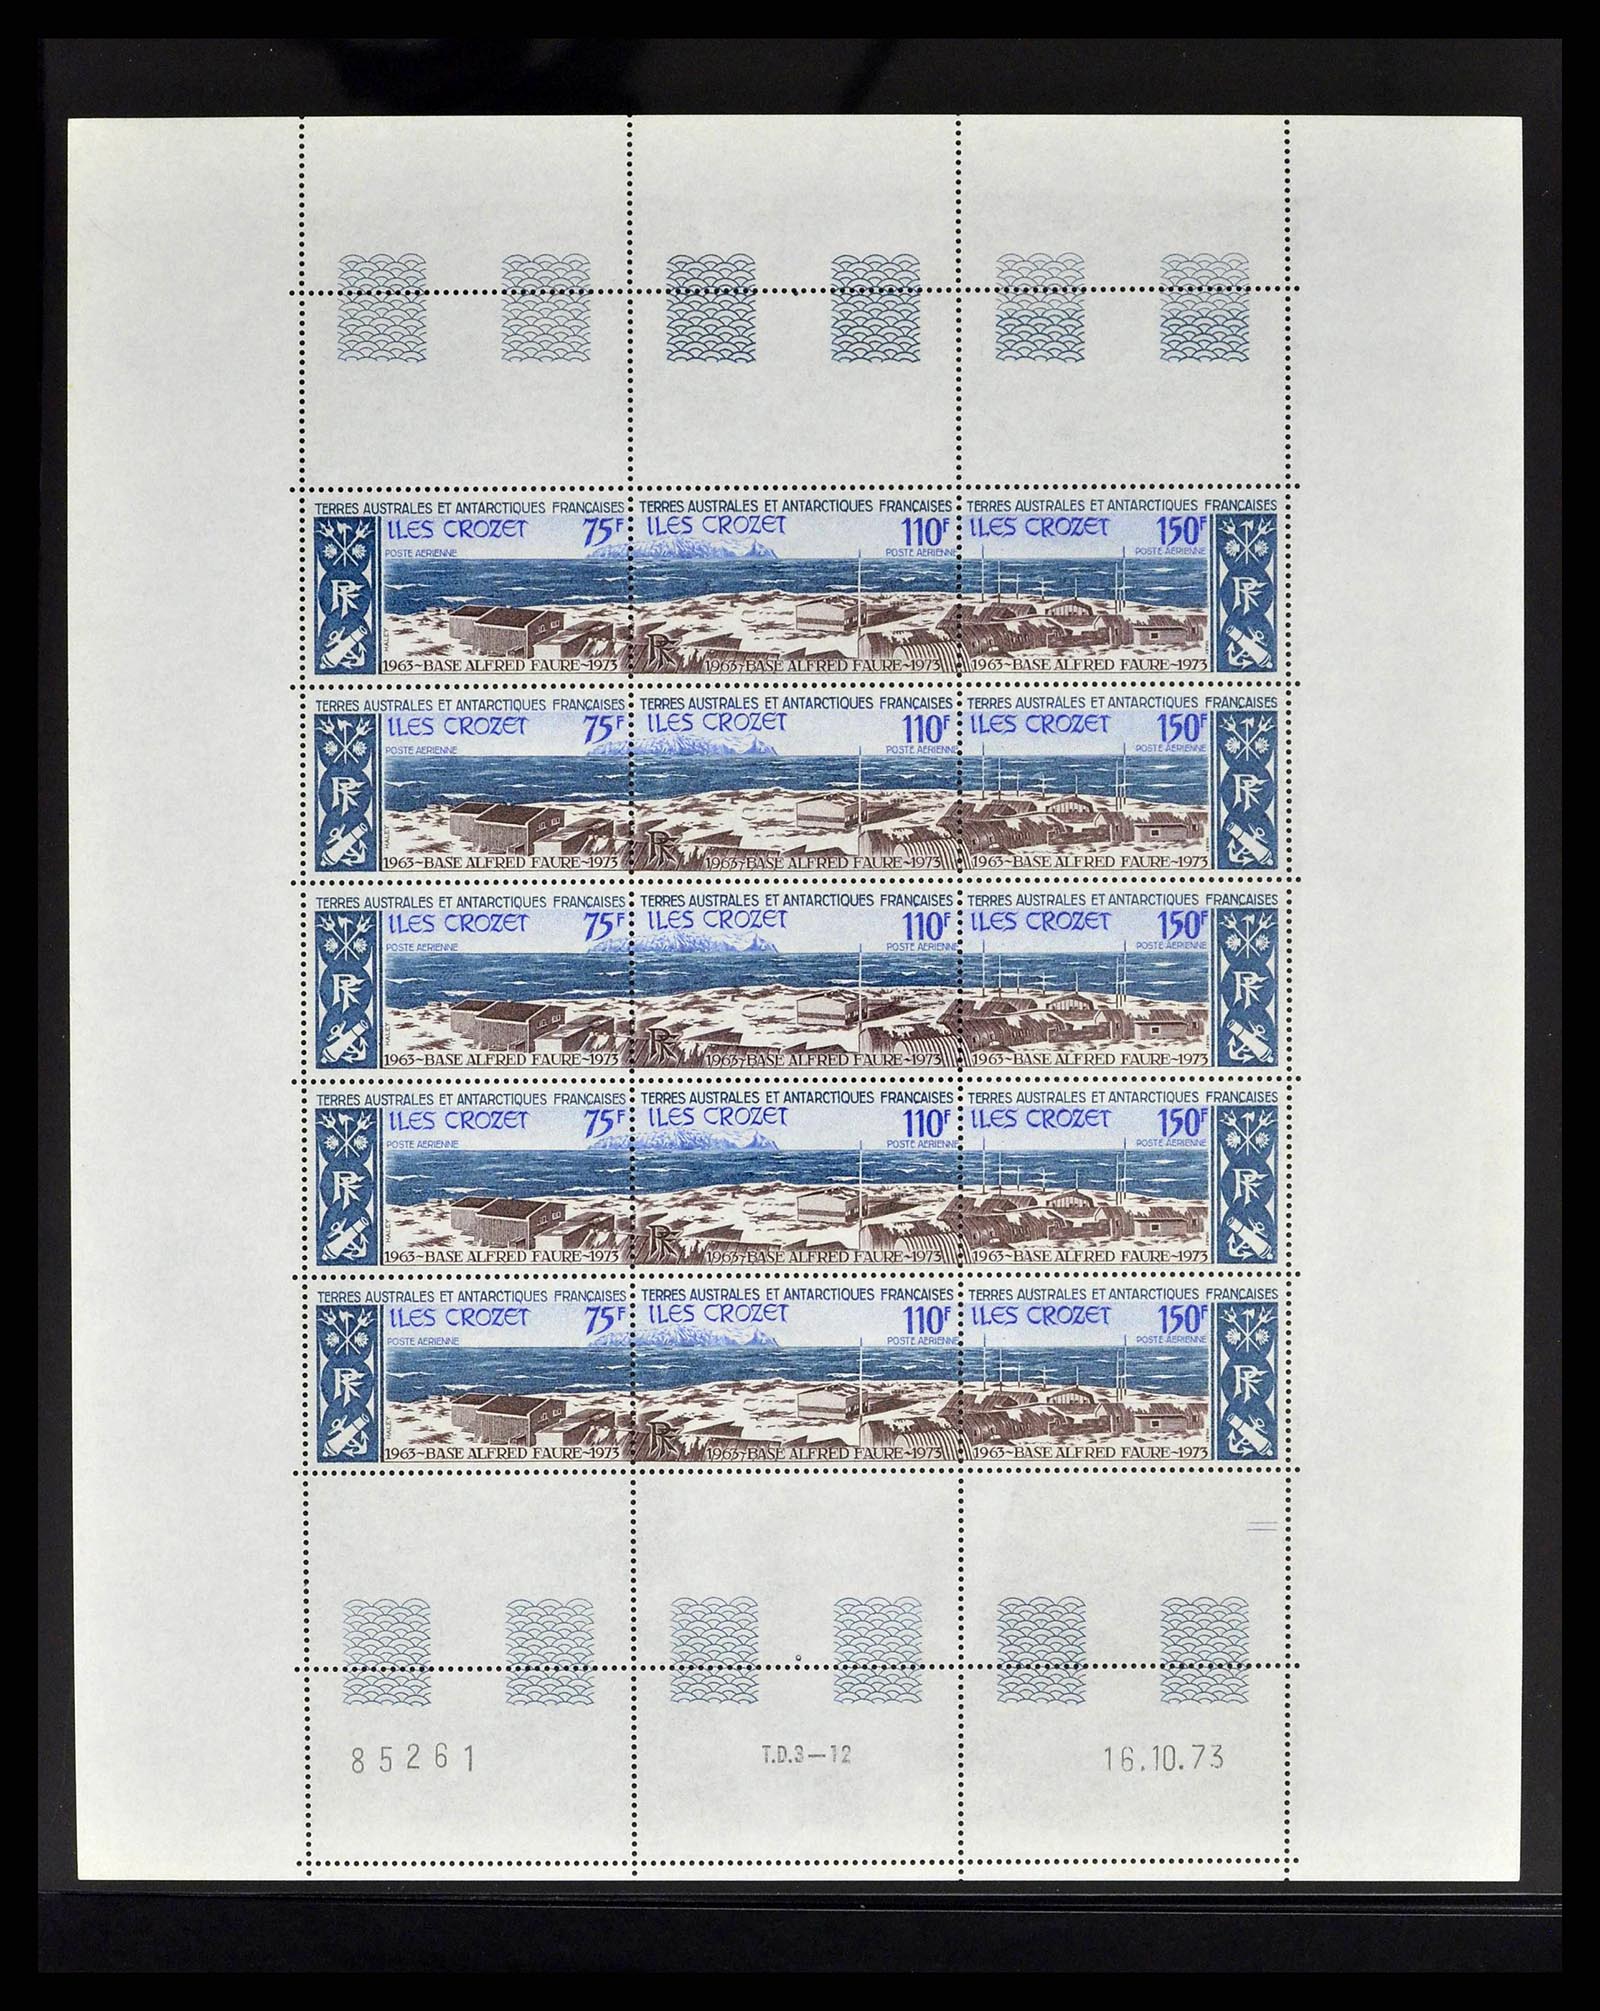 38854 0021 - Stamp collection 38854 French Antarctics 1981-1995.